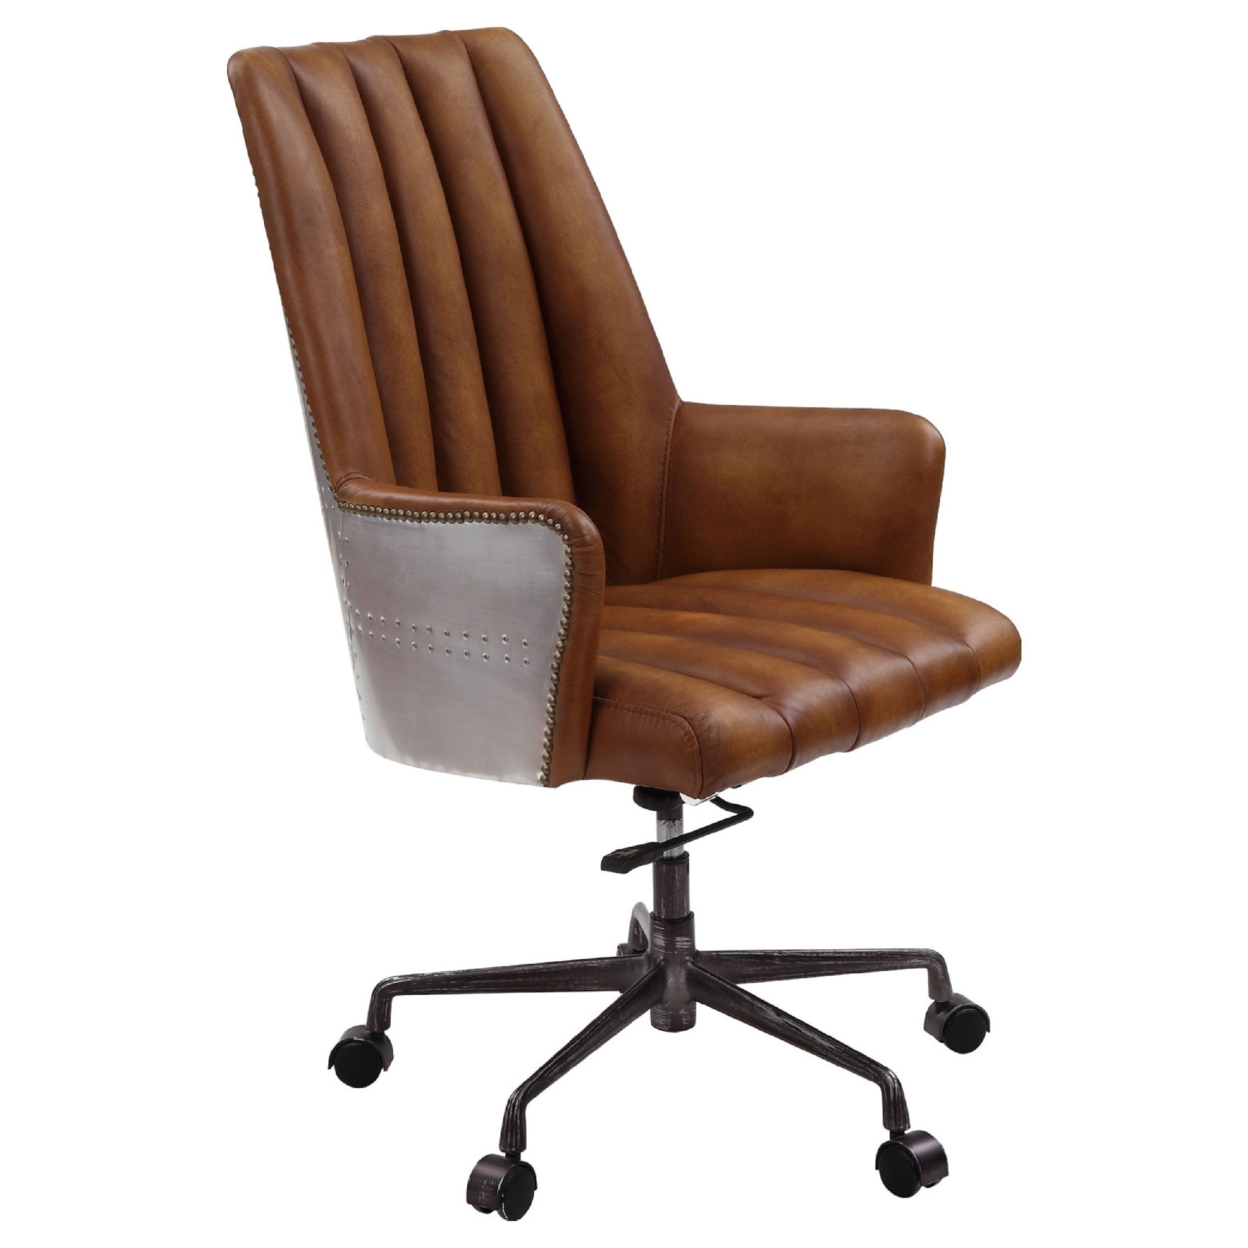 Office Chair With Leather Seat And Channel Stitching, Brown- Saltoro Sherpi